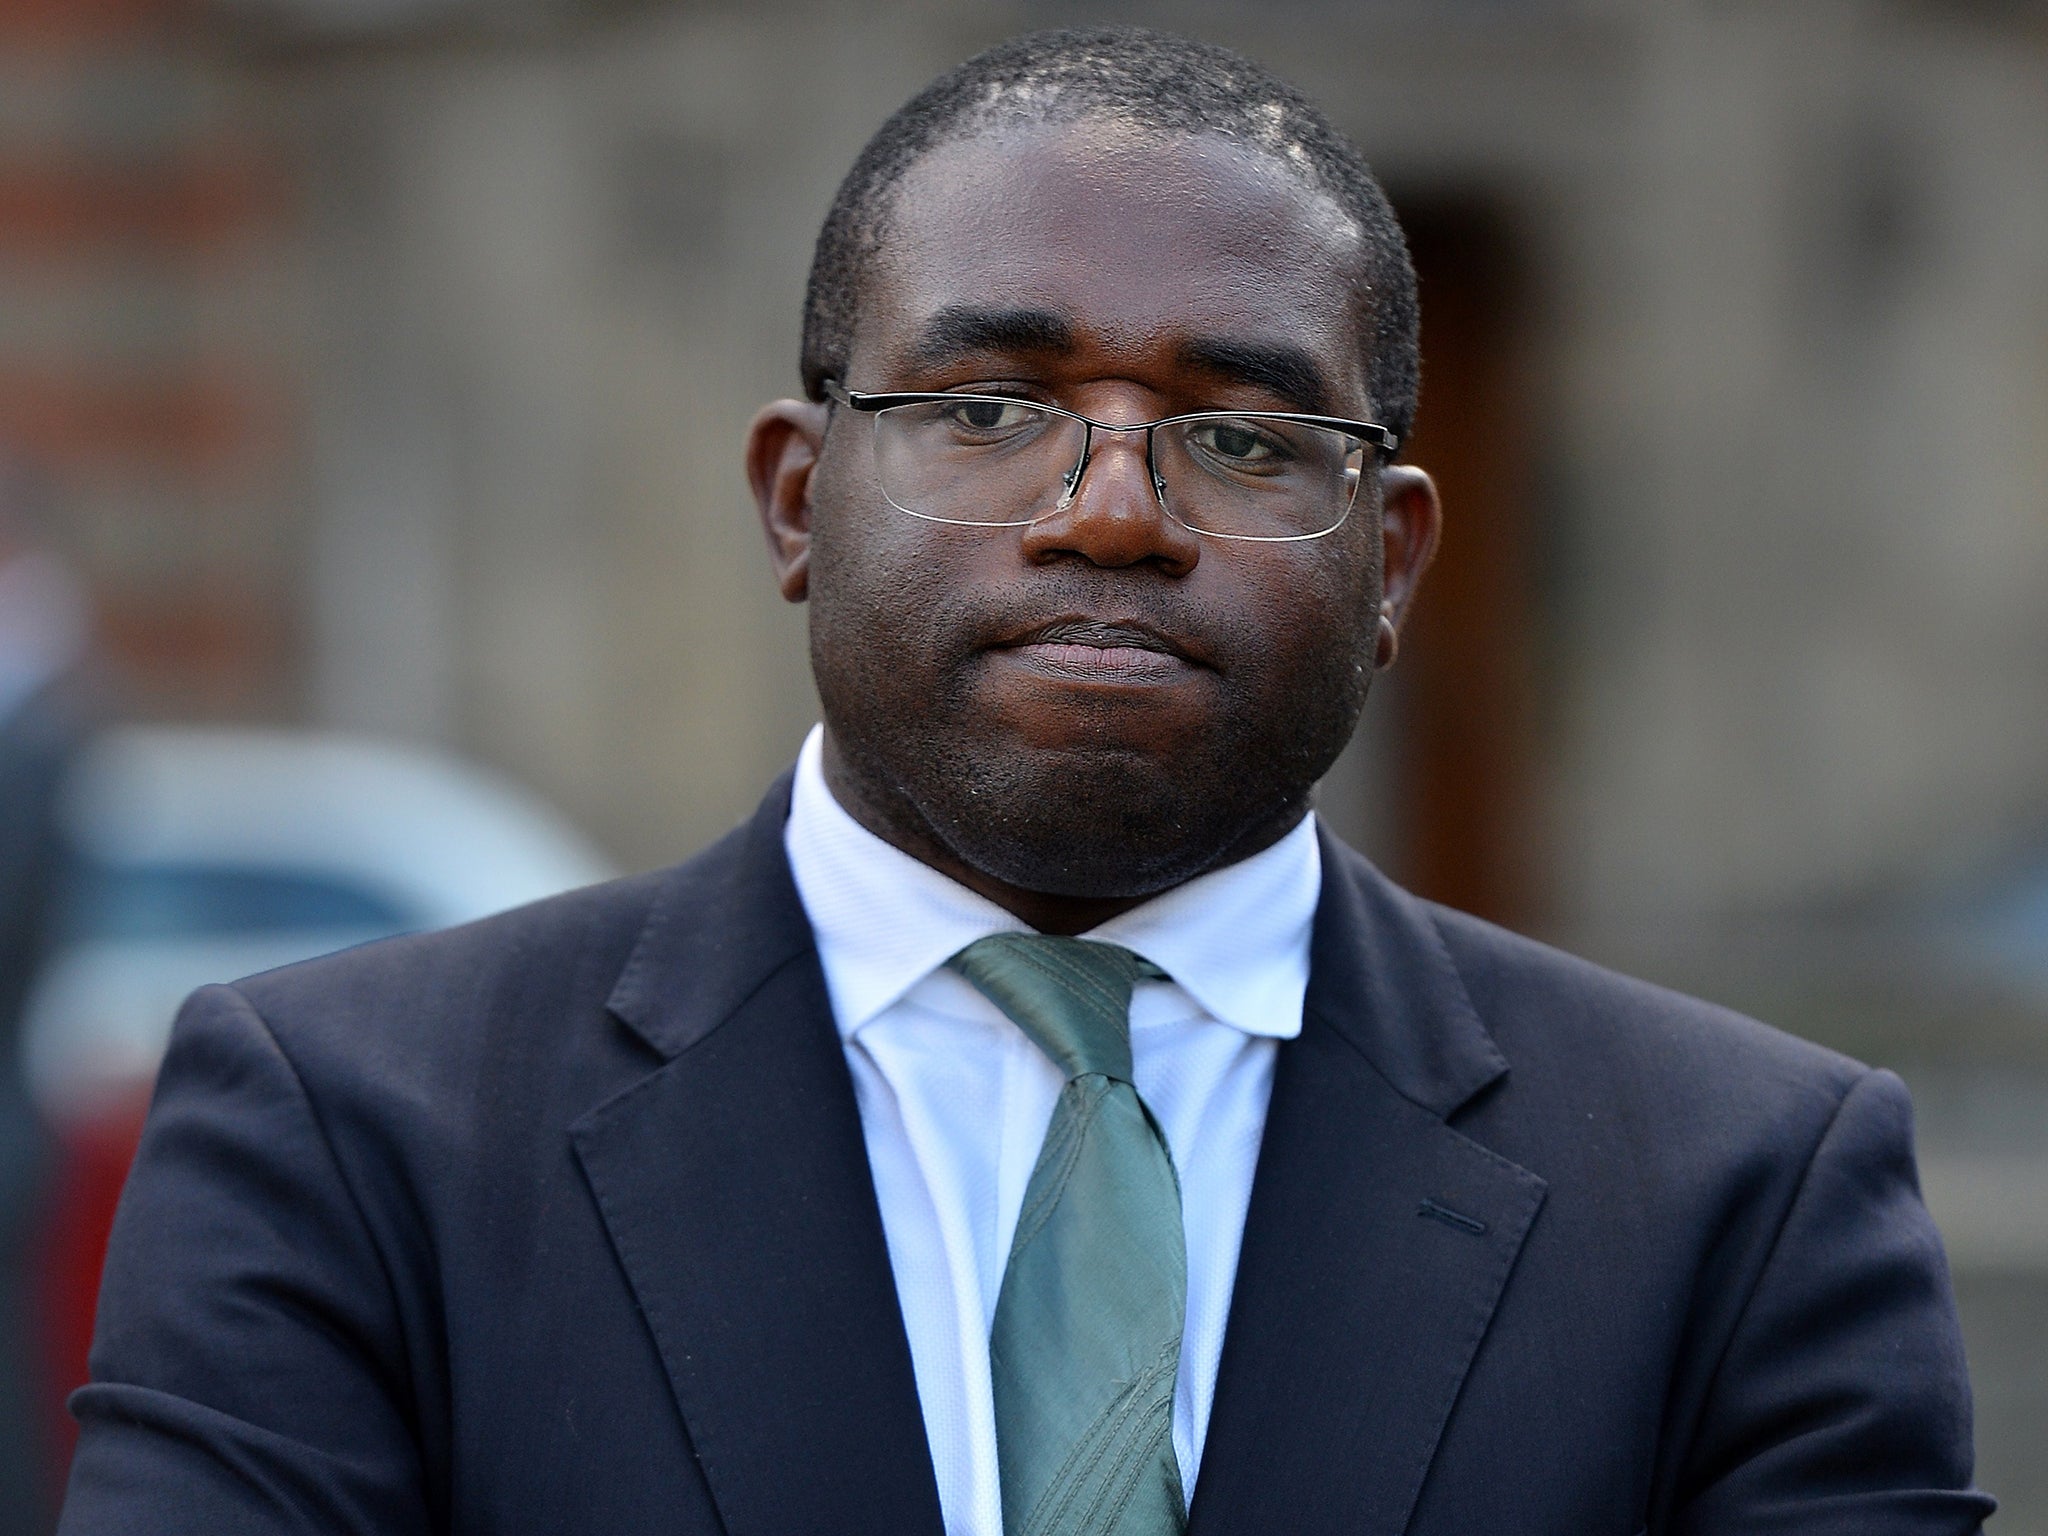 MP David Lammy would become the capital’s first black mayor if he won the 2016 Mayoral election